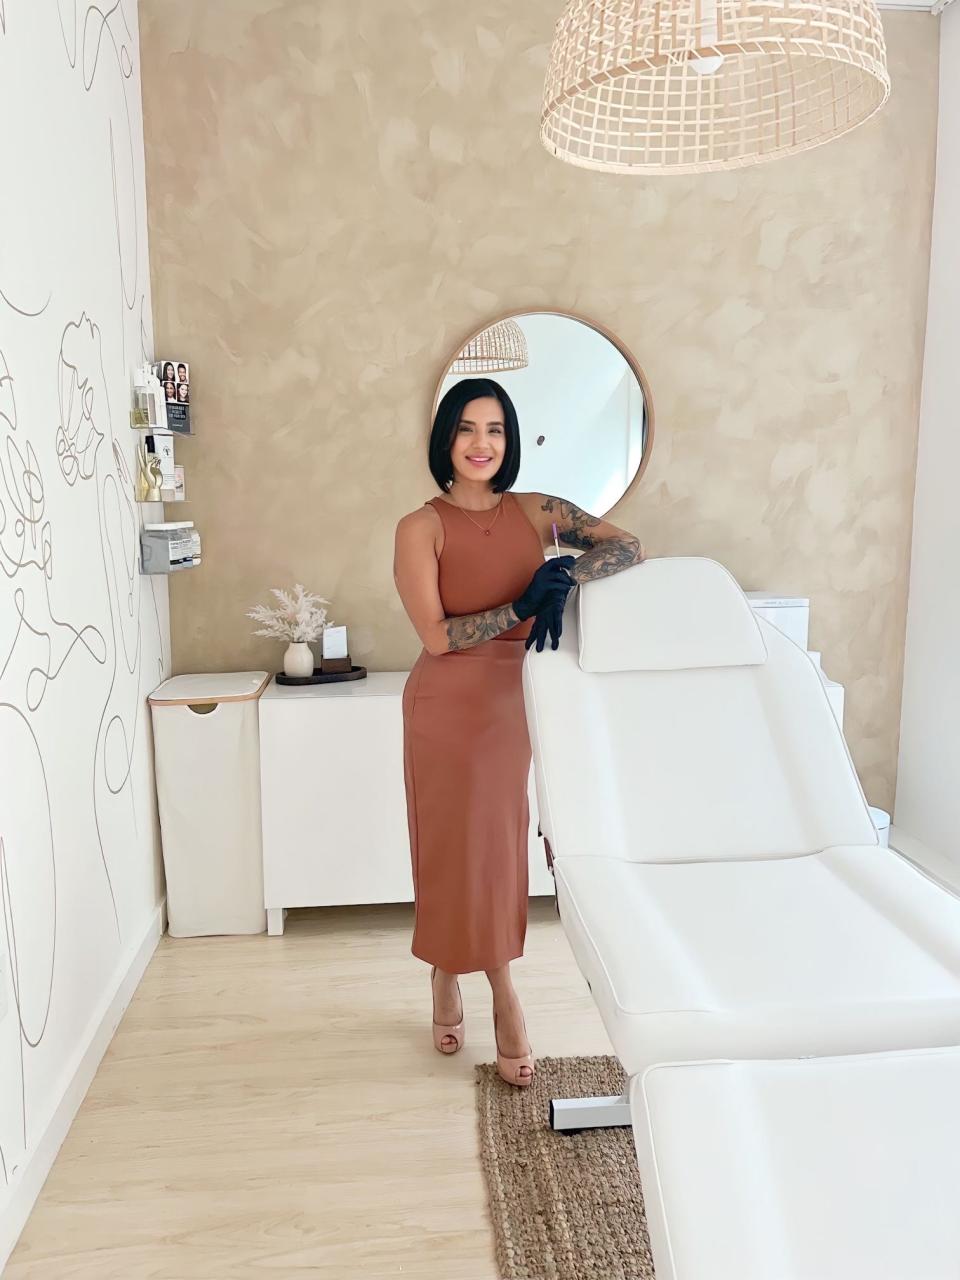 Julissa Sostre a registered nurse and owner of Hadara Aesthetics, preps before taking her next Botox injection client on Tuesday, Aug. 8, 2023, at Lume + Lather Beauty Spa, a luxury spa at 59 Pleasant St. Suite C, Randolph.